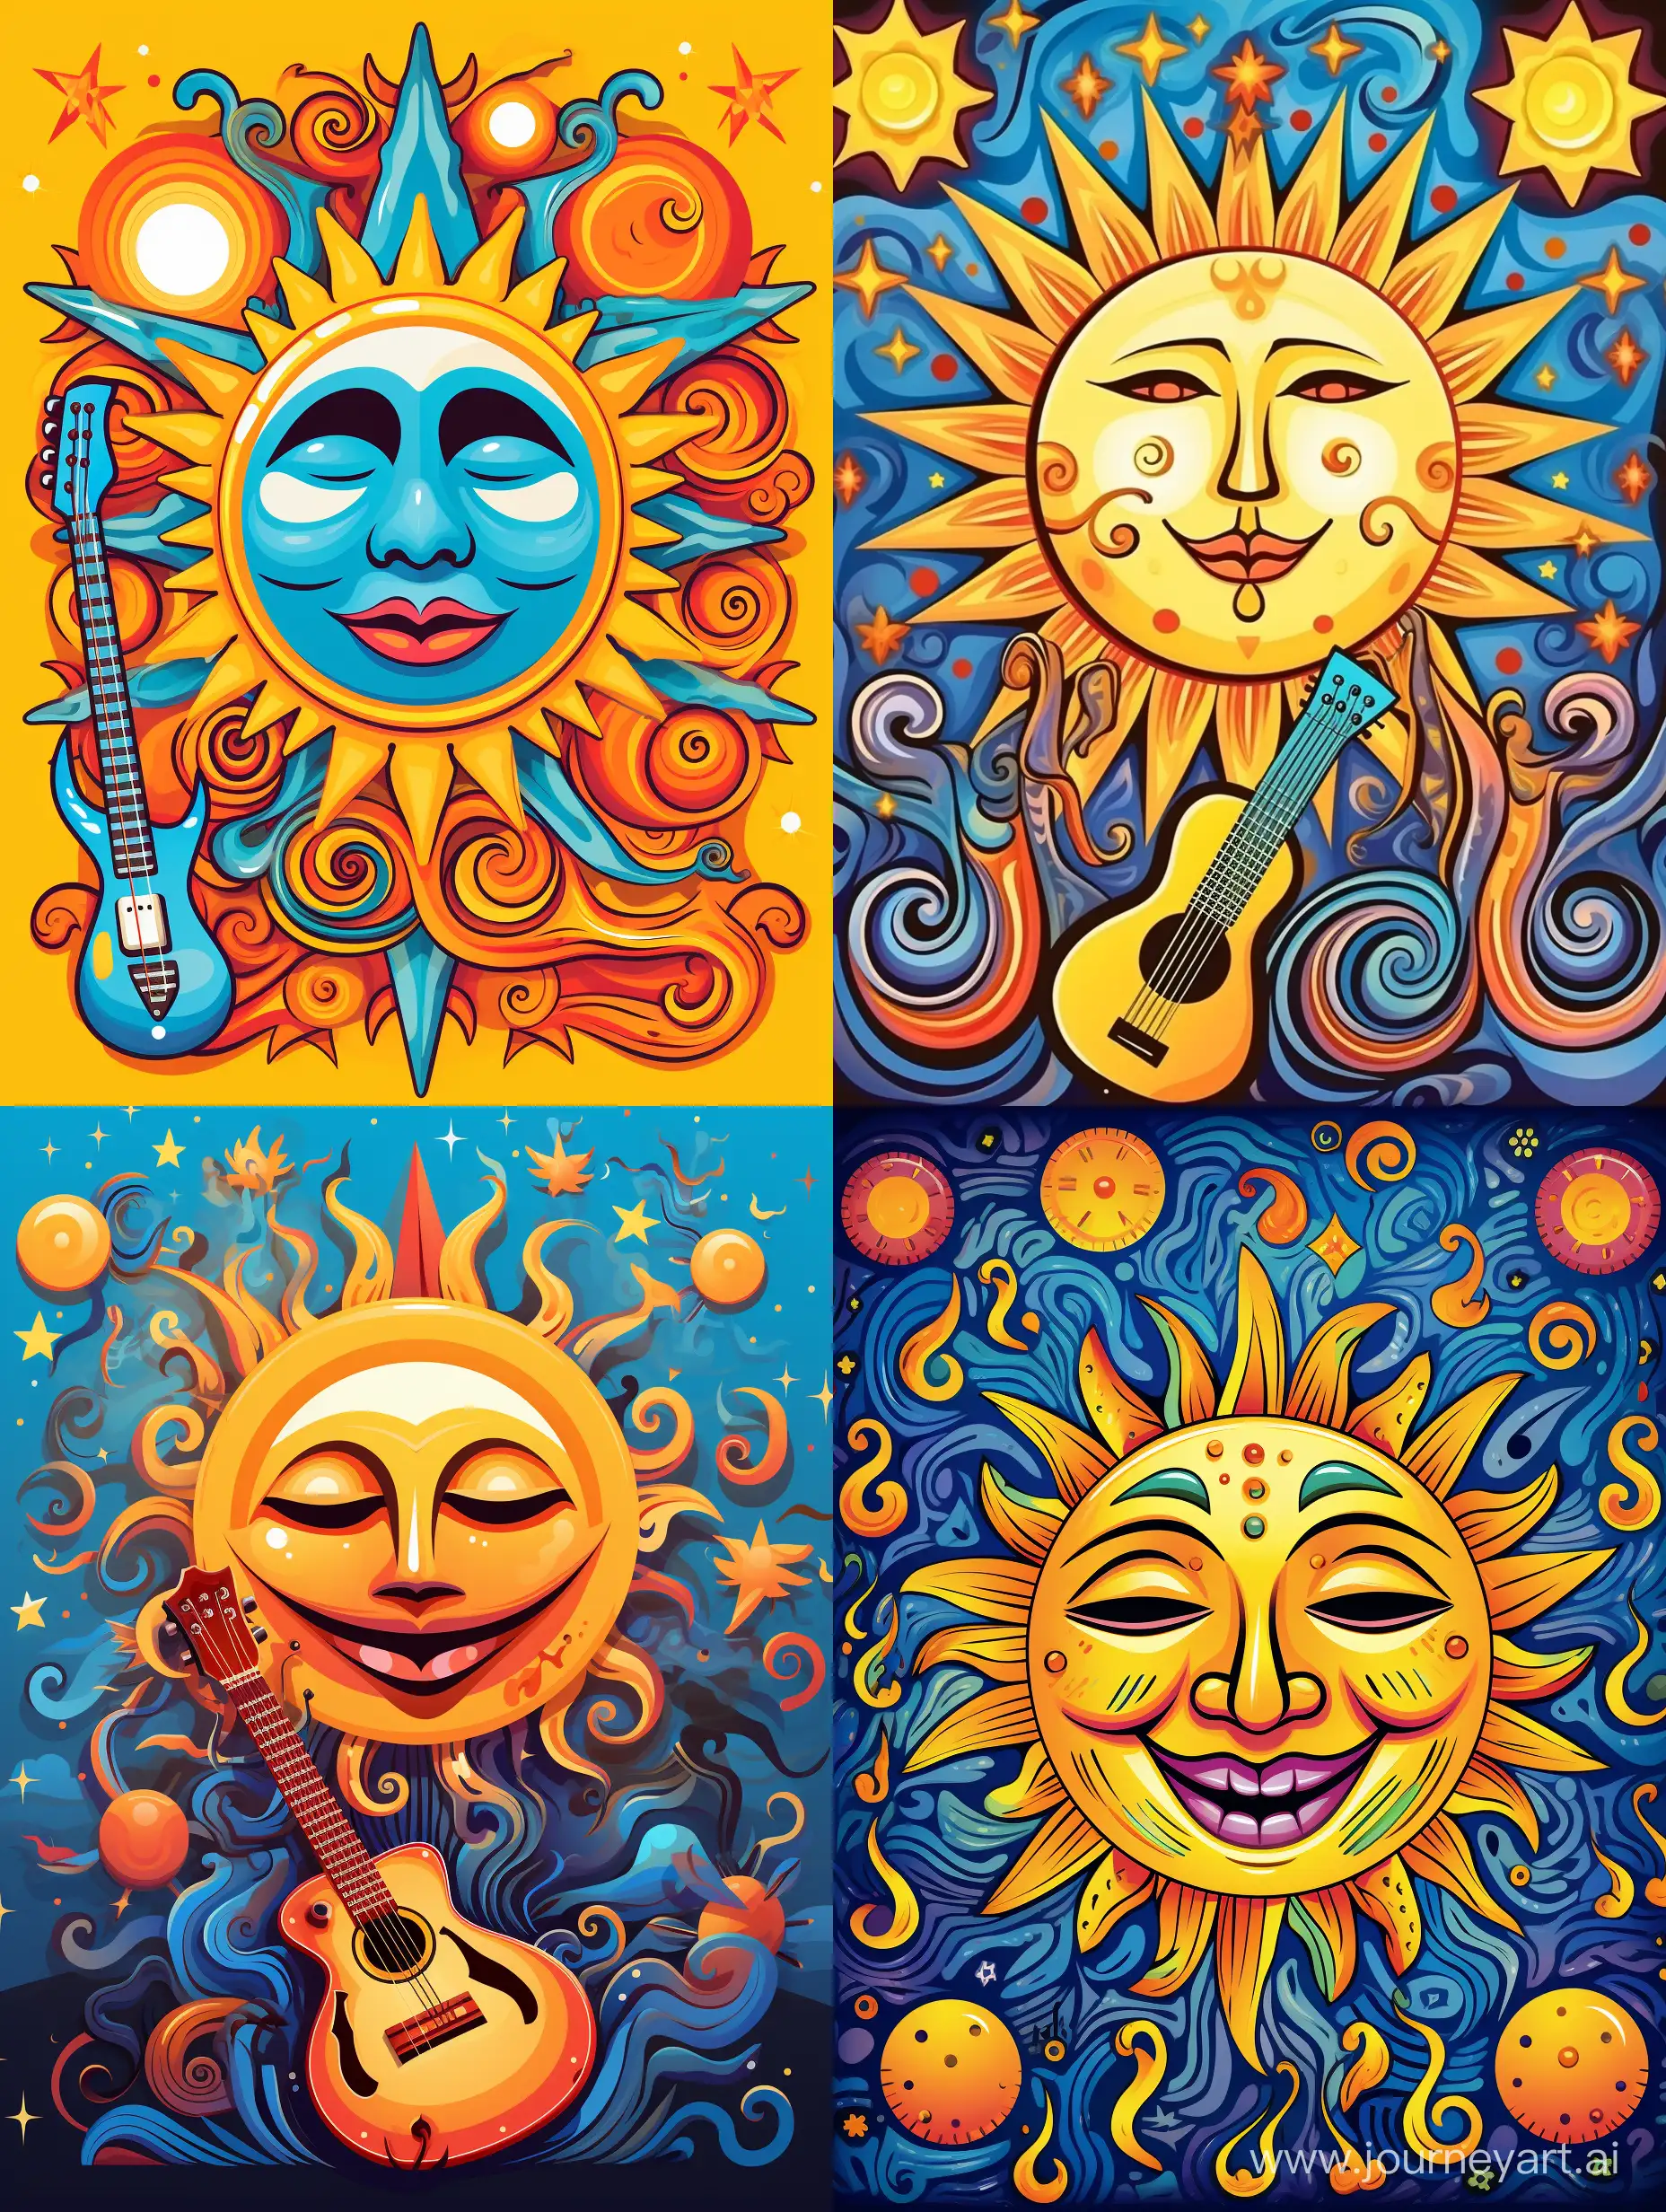 the sun, on the background of musical symbols, complex colors, cartoon style, caricature, pop art style